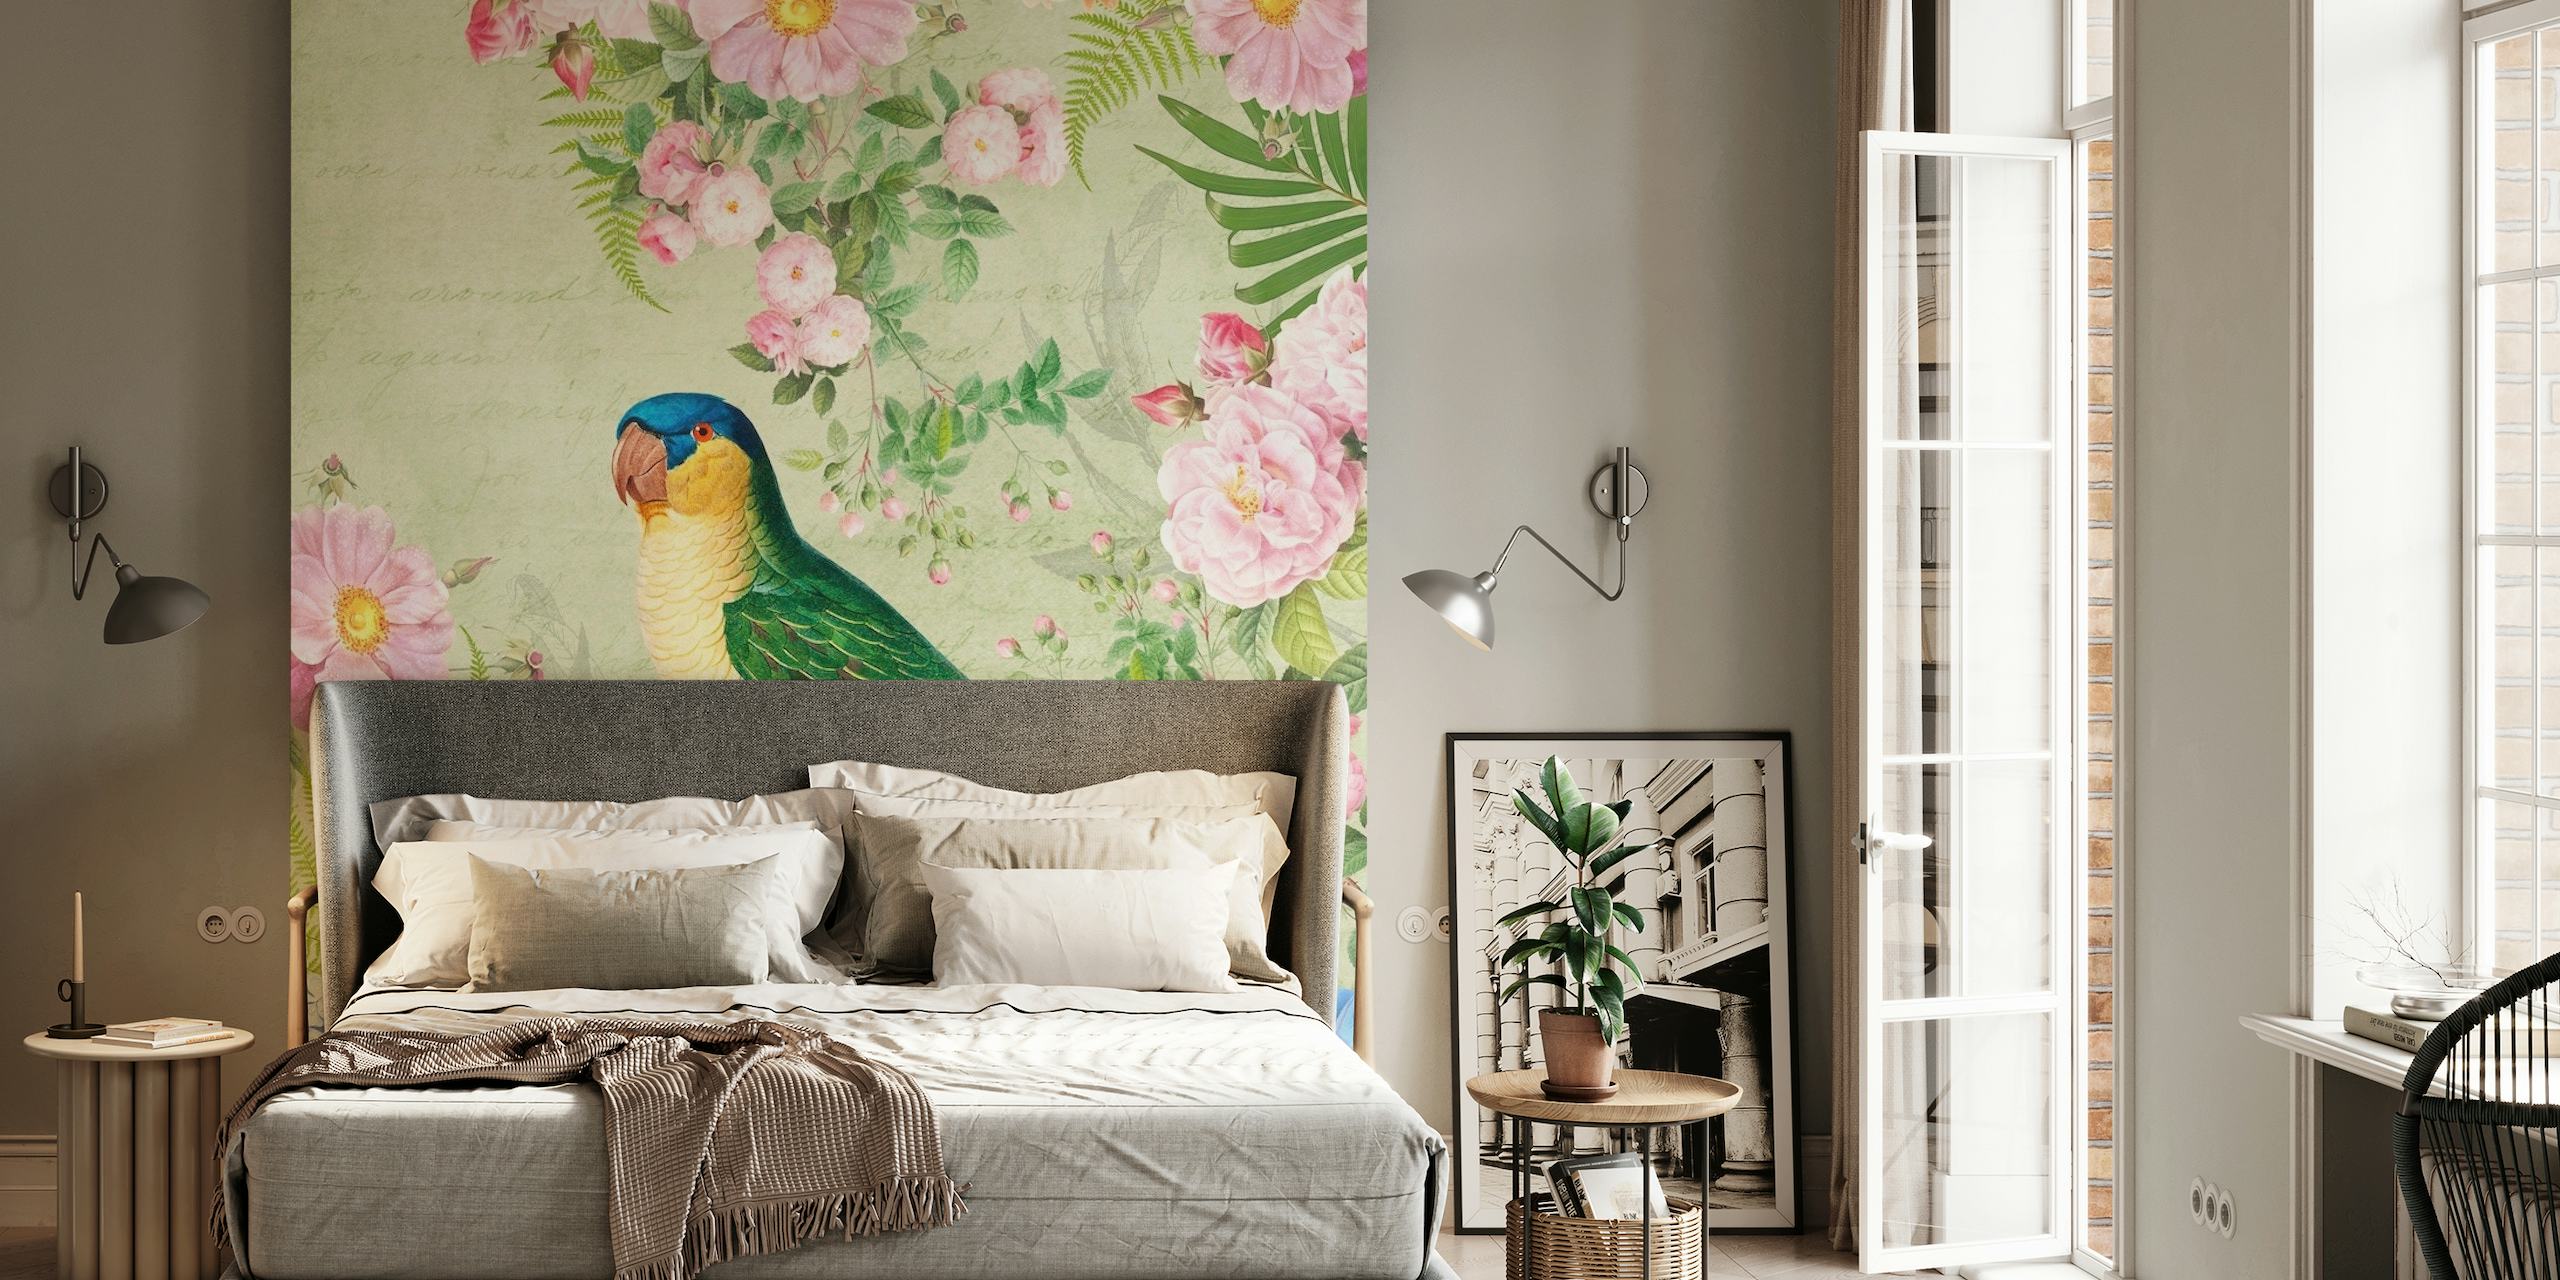 Exotic bird on a backdrop of blooming flowers and green foliage wall mural